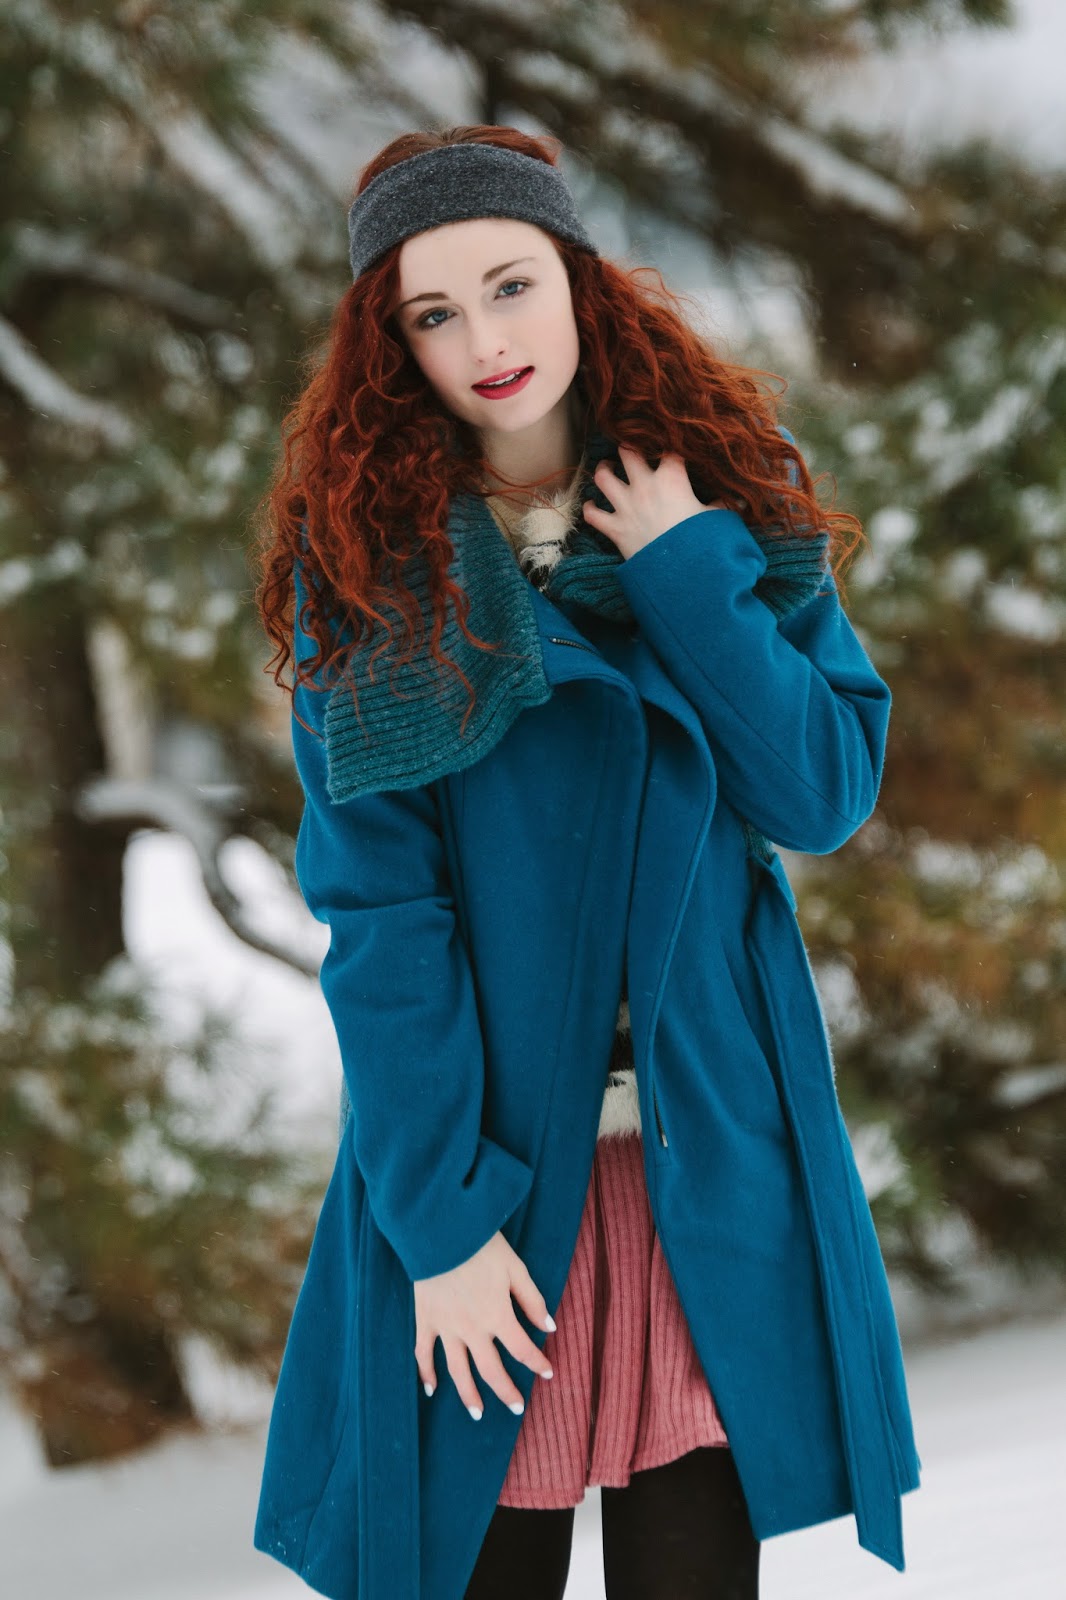 From Britt's Eye View: A Snow Bunny Winter Session | Oklahoma Photographer